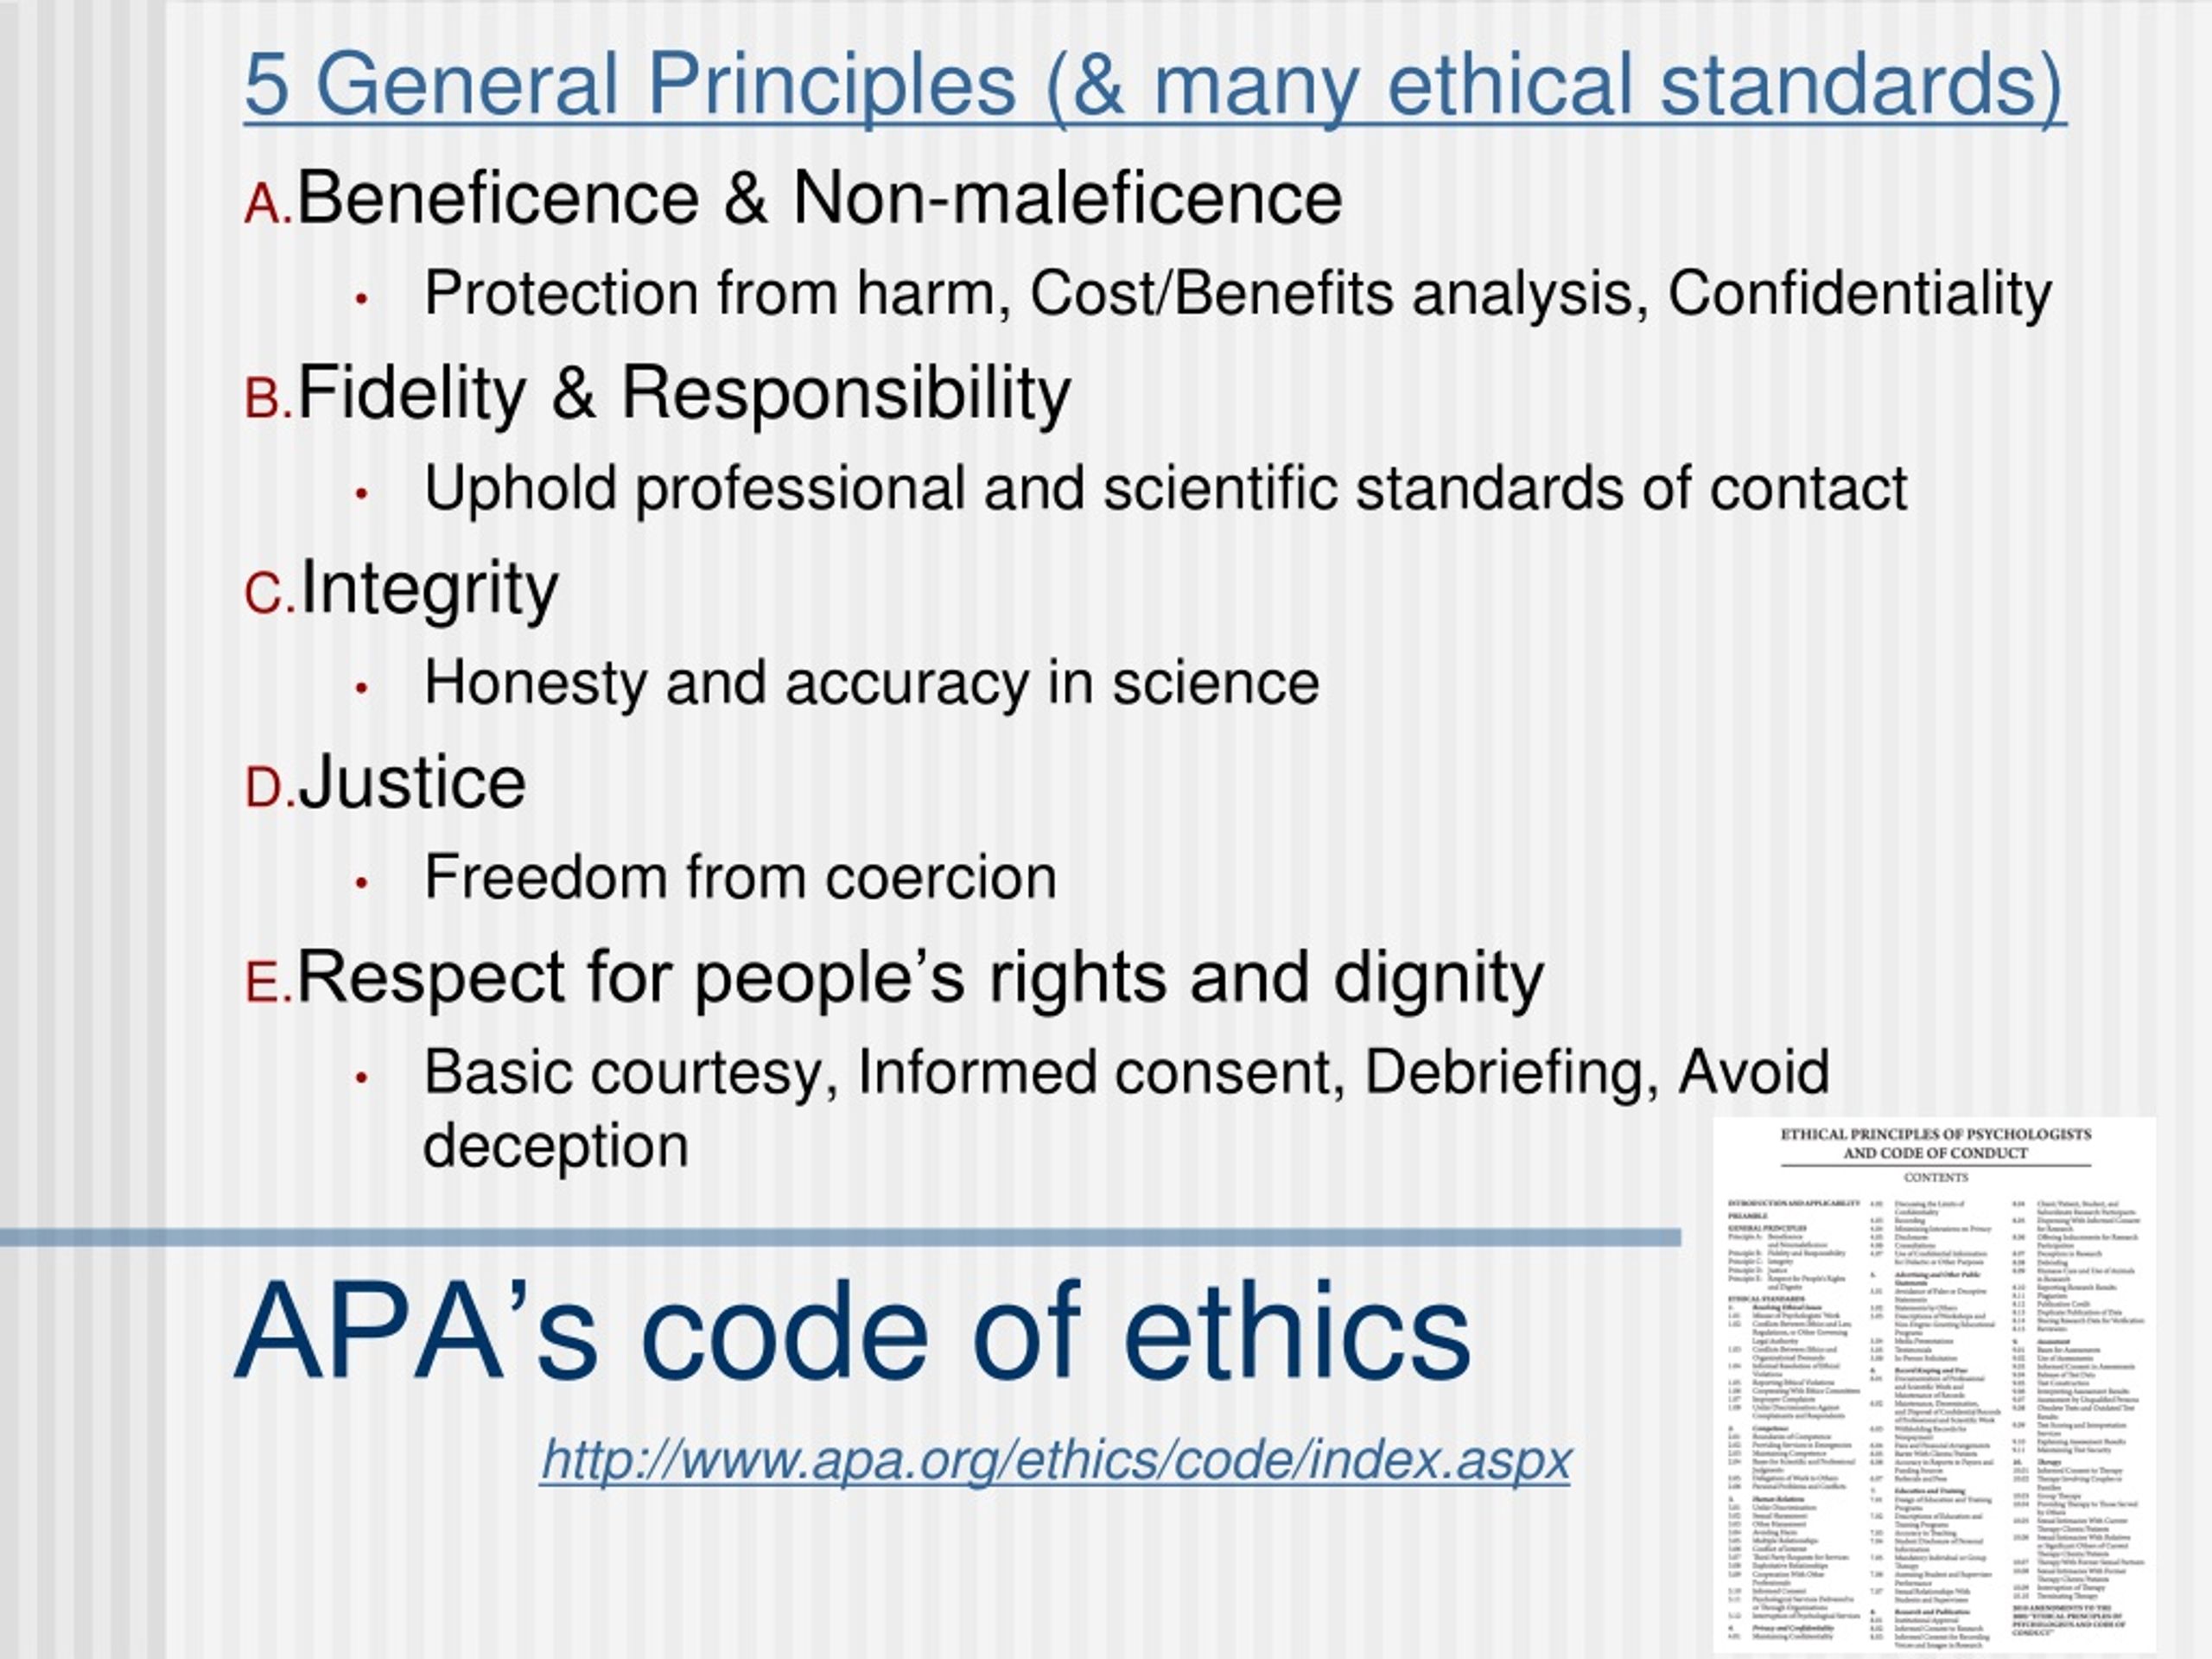 apa ethics code for human research